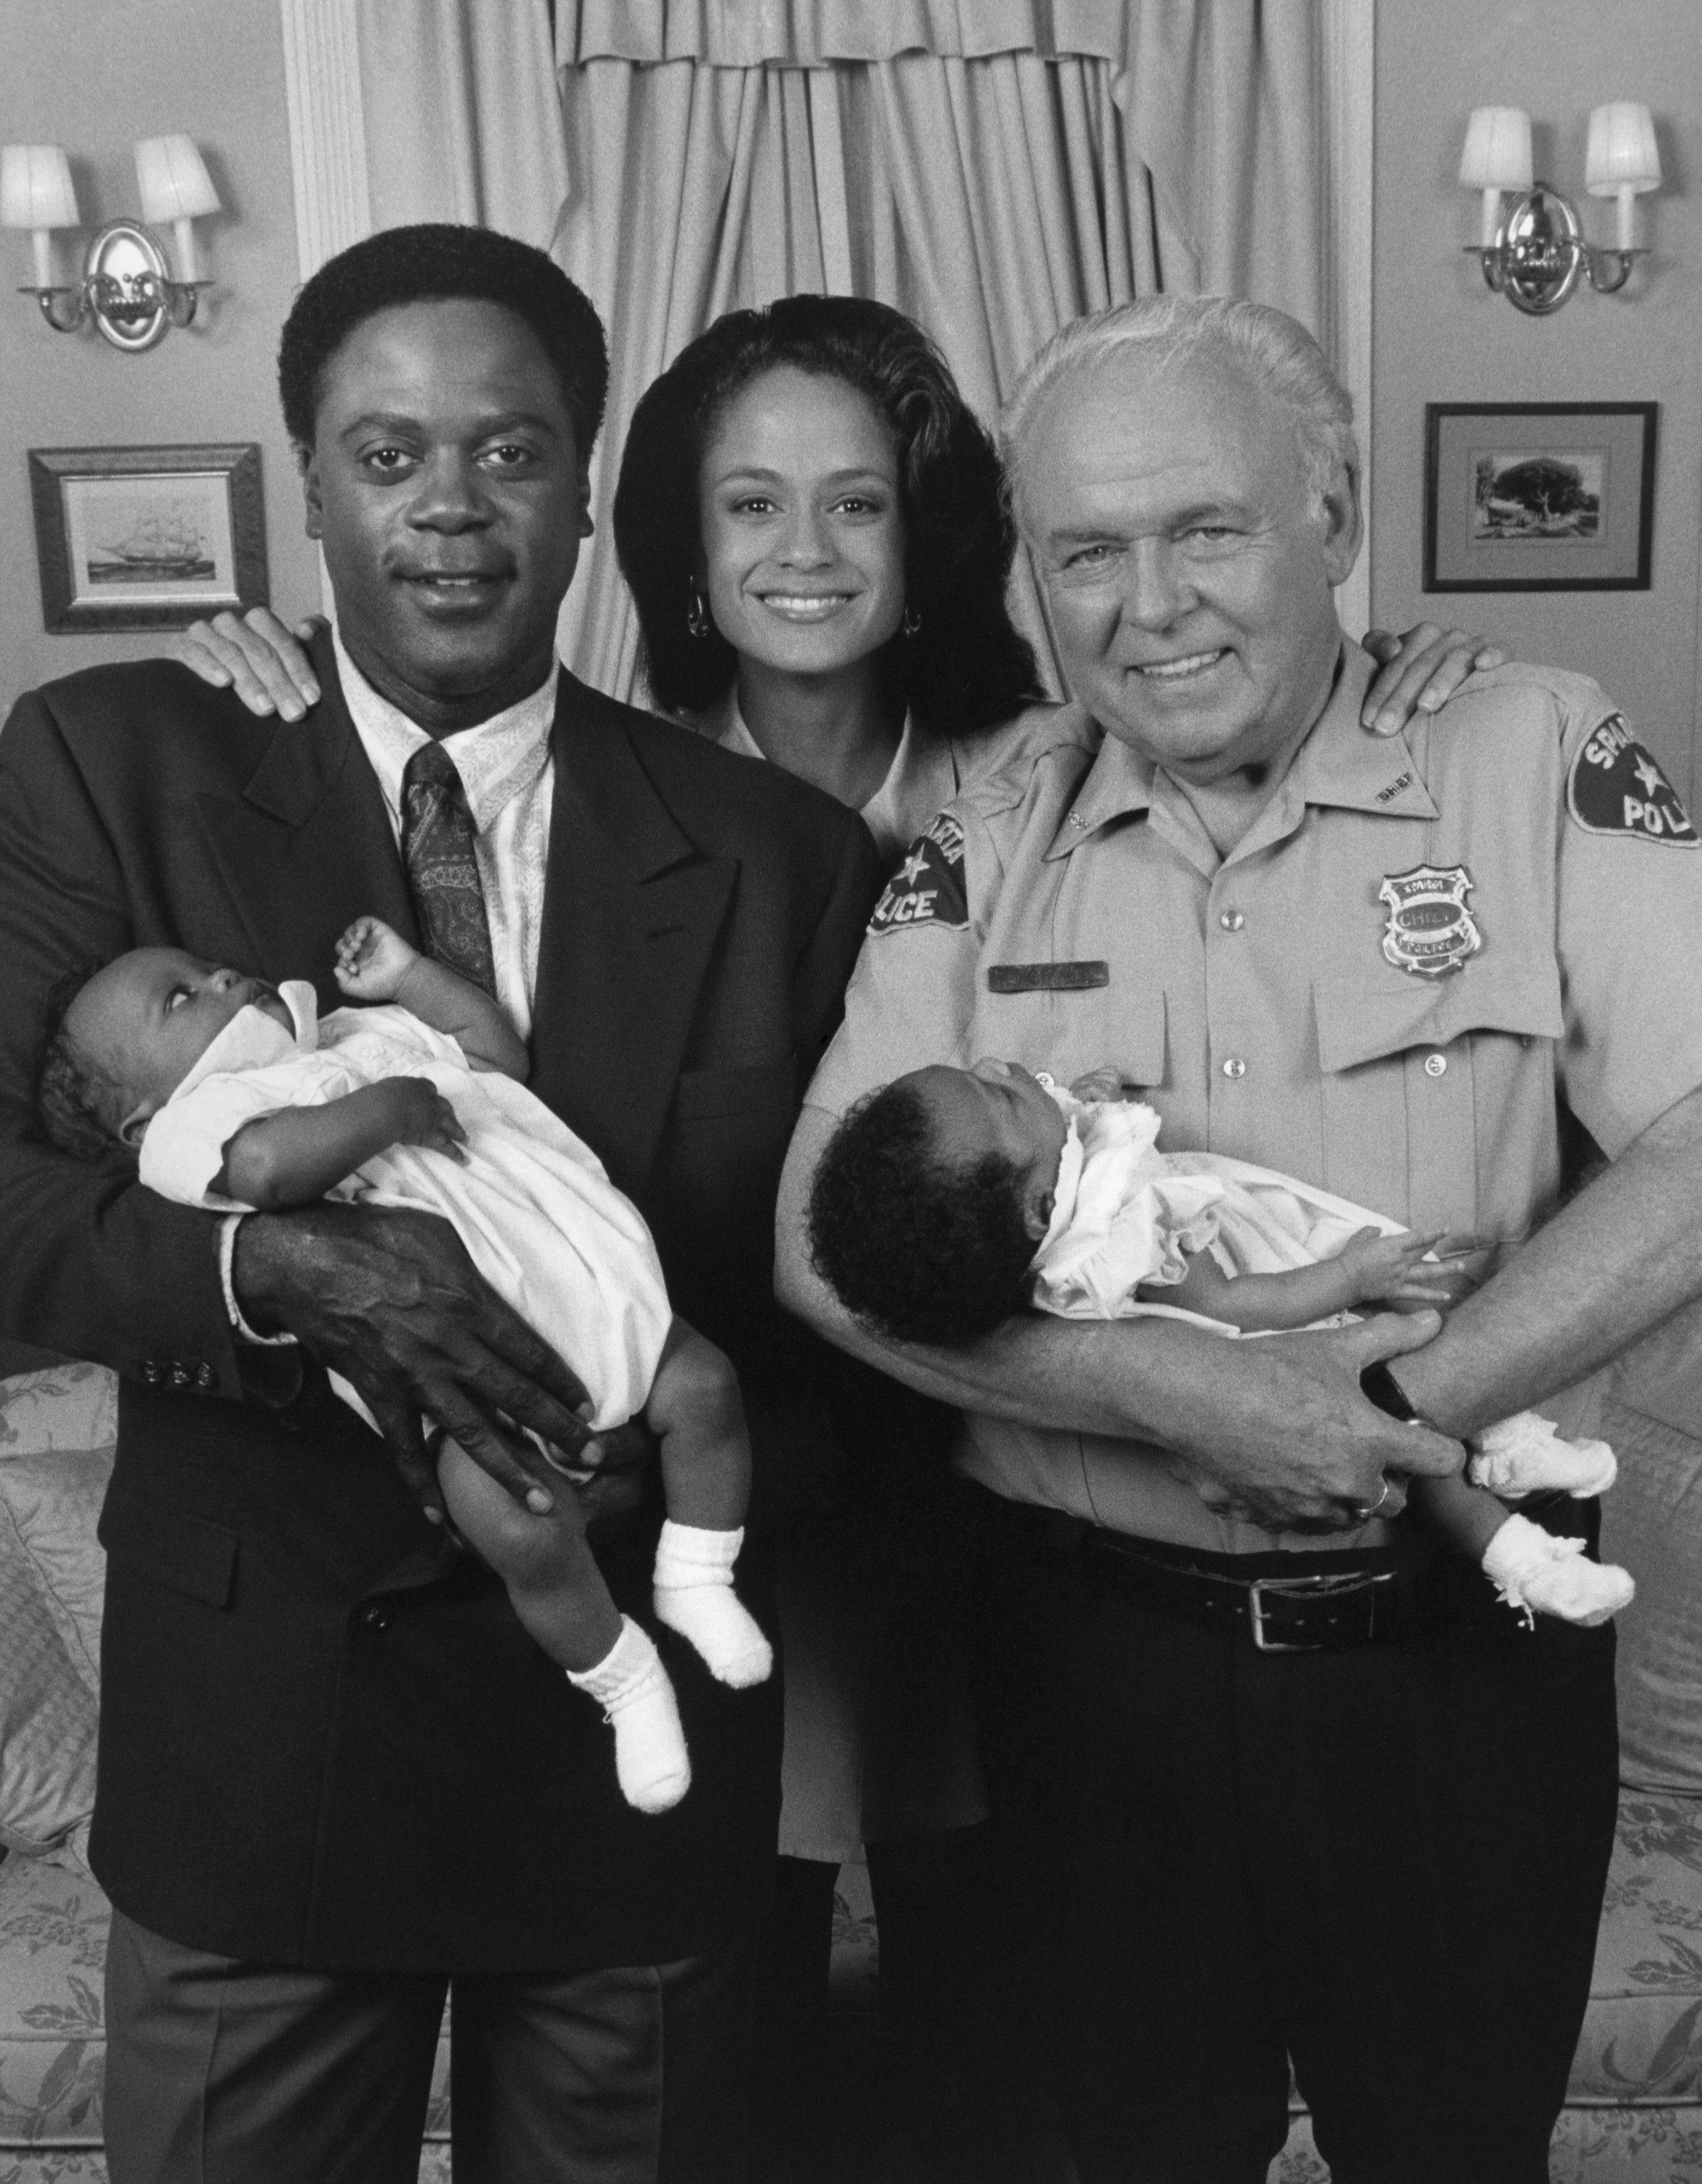 Cast of "In the Heat of the Night" on set | Source: Getty Images